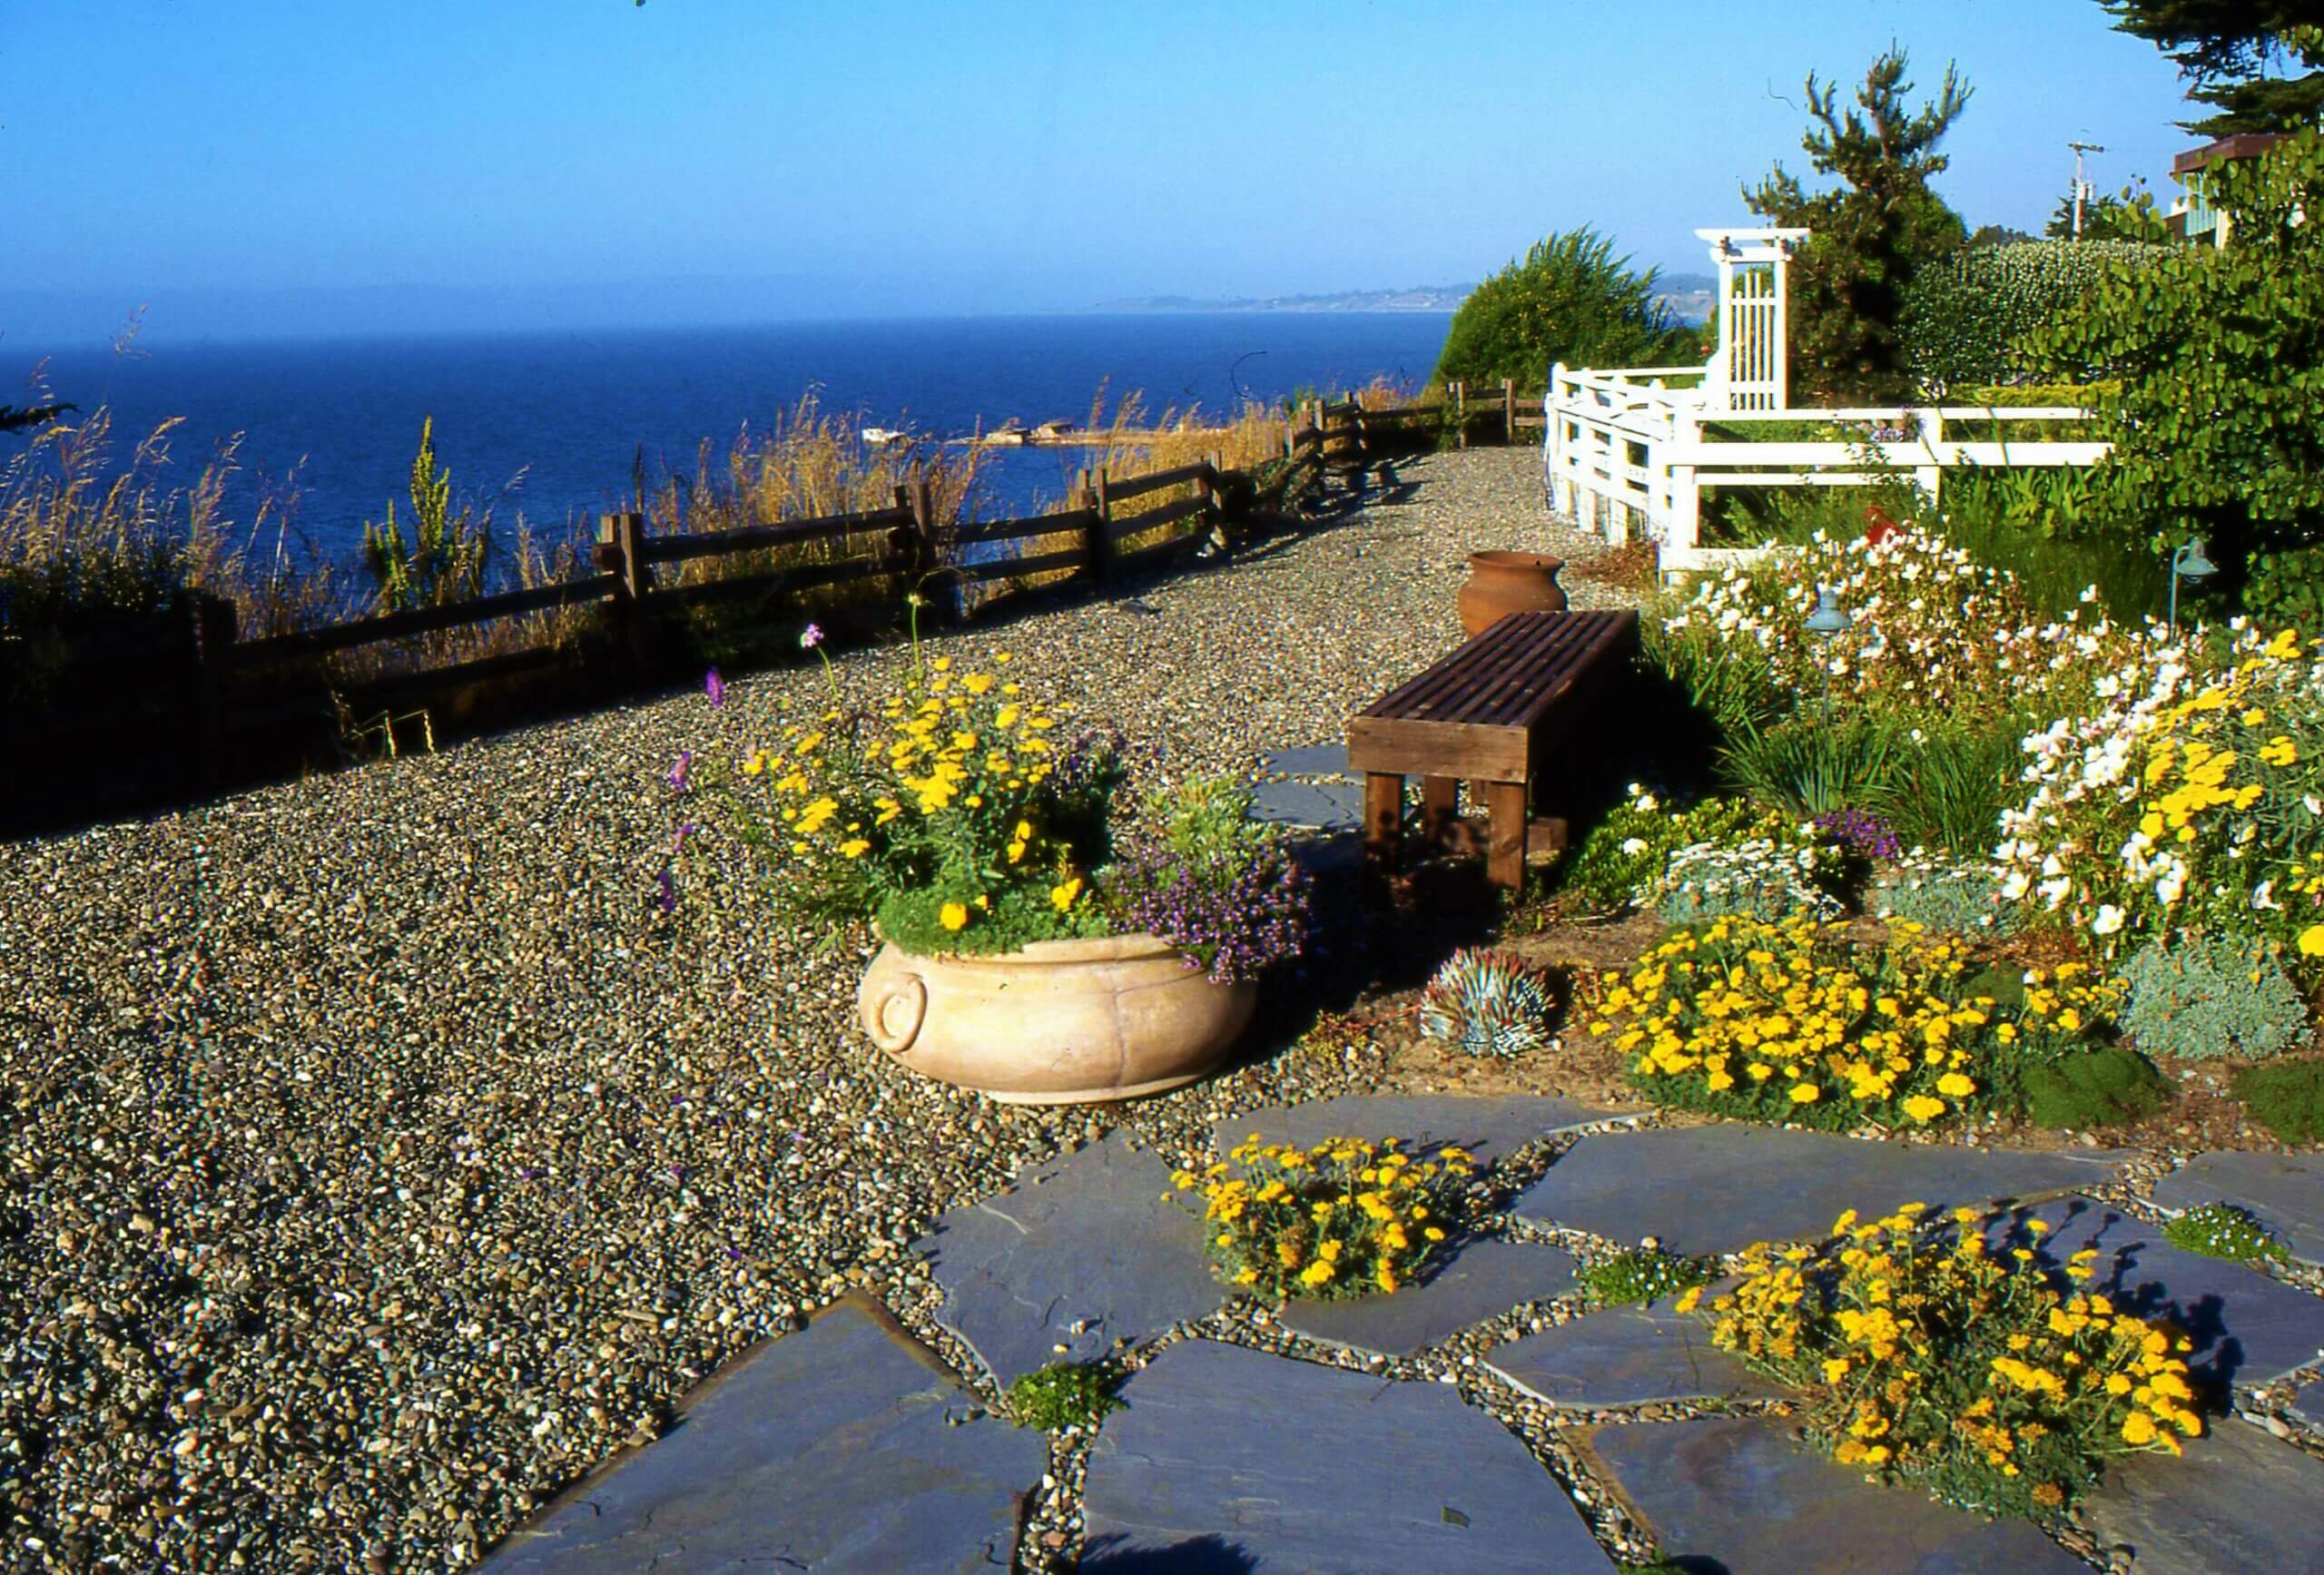 Paver and gravel landscape with wildflowers overlooking the Pacific Ocean